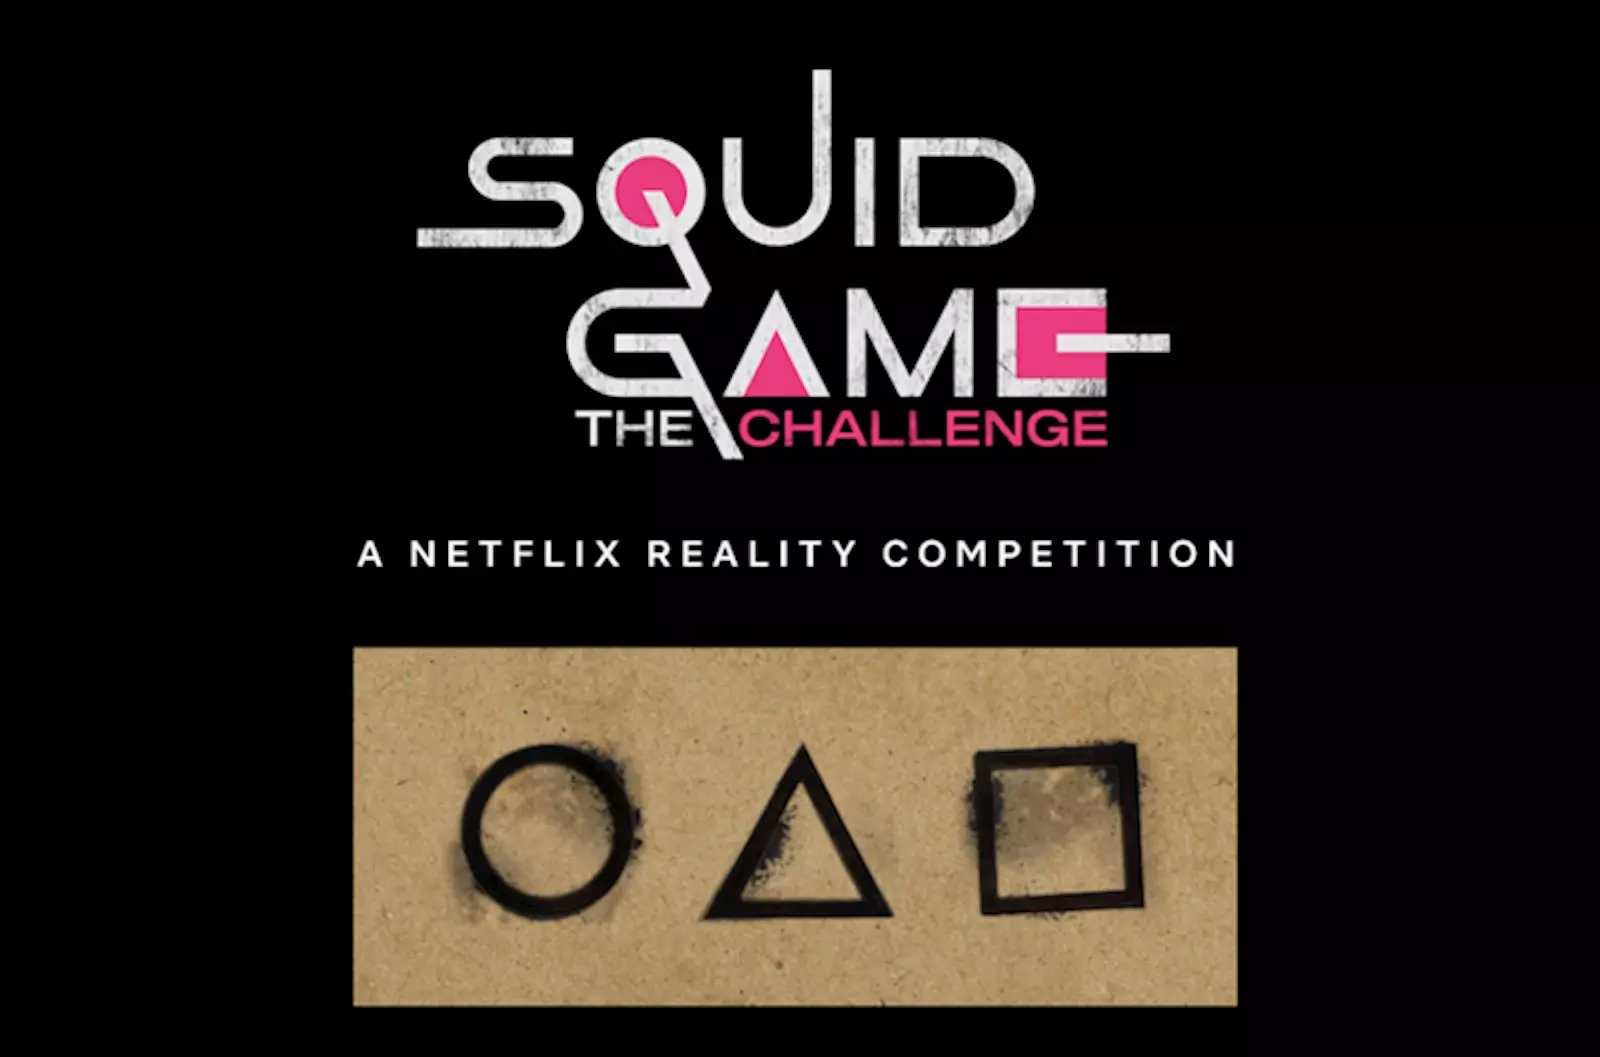 How to Be Cast in Netflix's Real Life 'Squid Game' Challenge